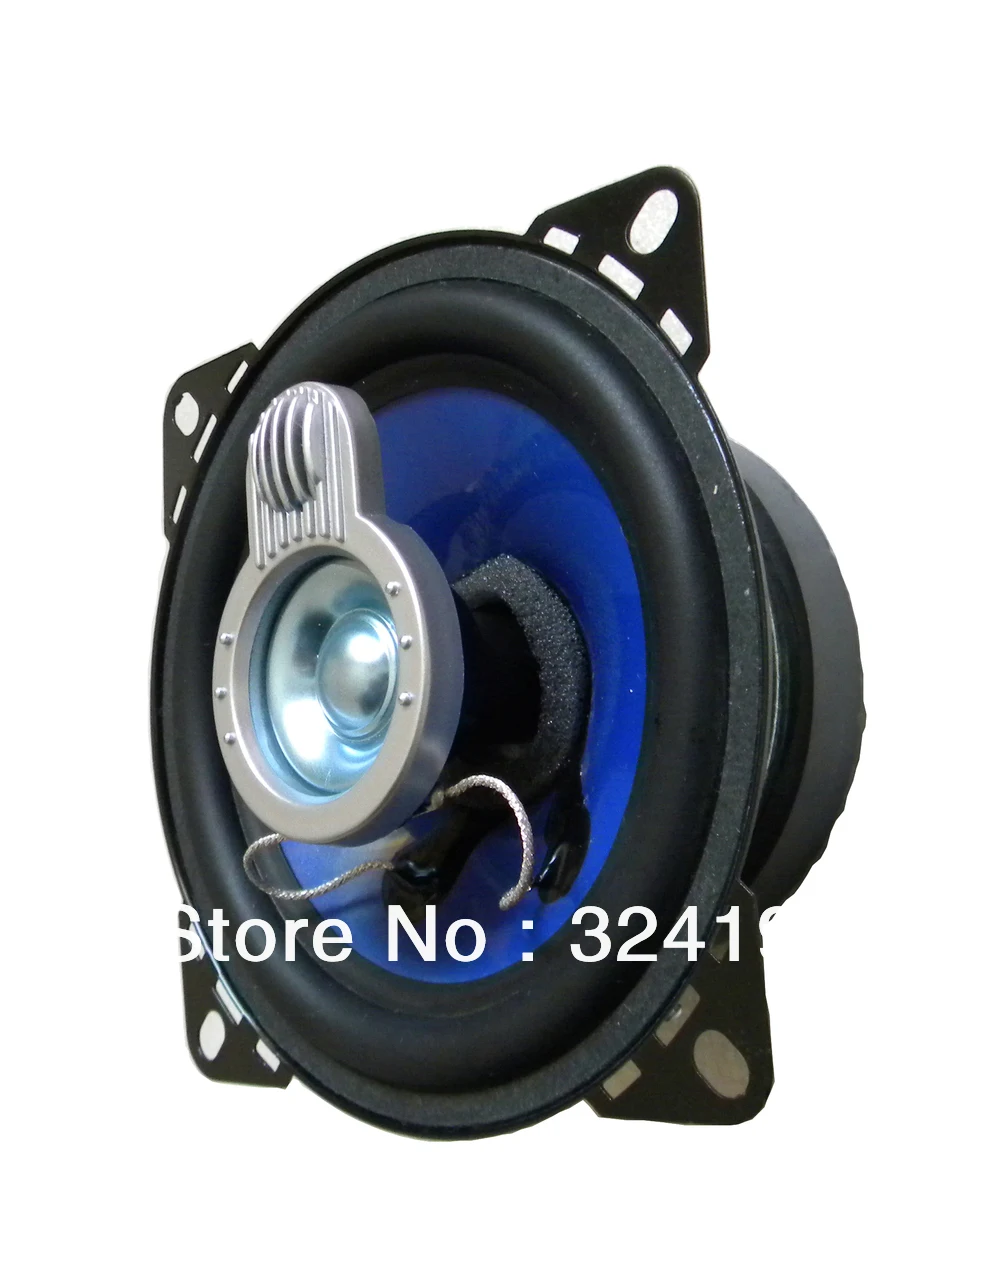 

Blue Injection Cone Rubber 4 inch Coaxial car audio speaker, 220watts 4OHM Car Louder Acoustic Speakers Hifi End speaker